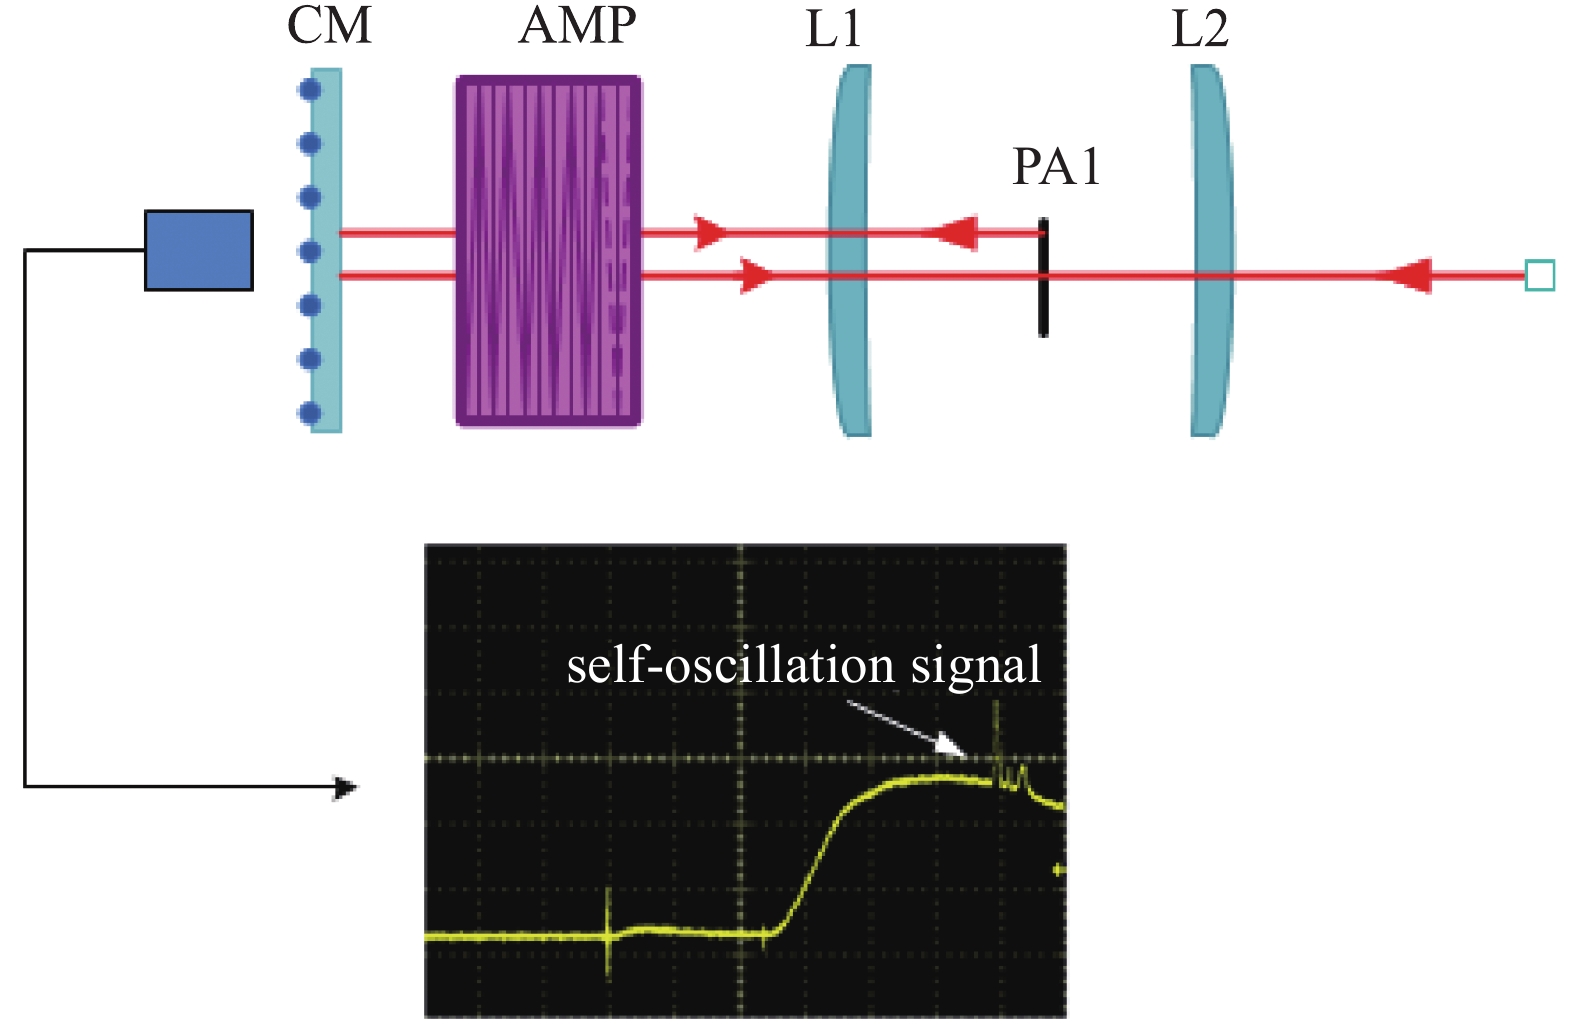 Amplifier optical path structure and self-oscillation time waveform in the back of cavity mirror